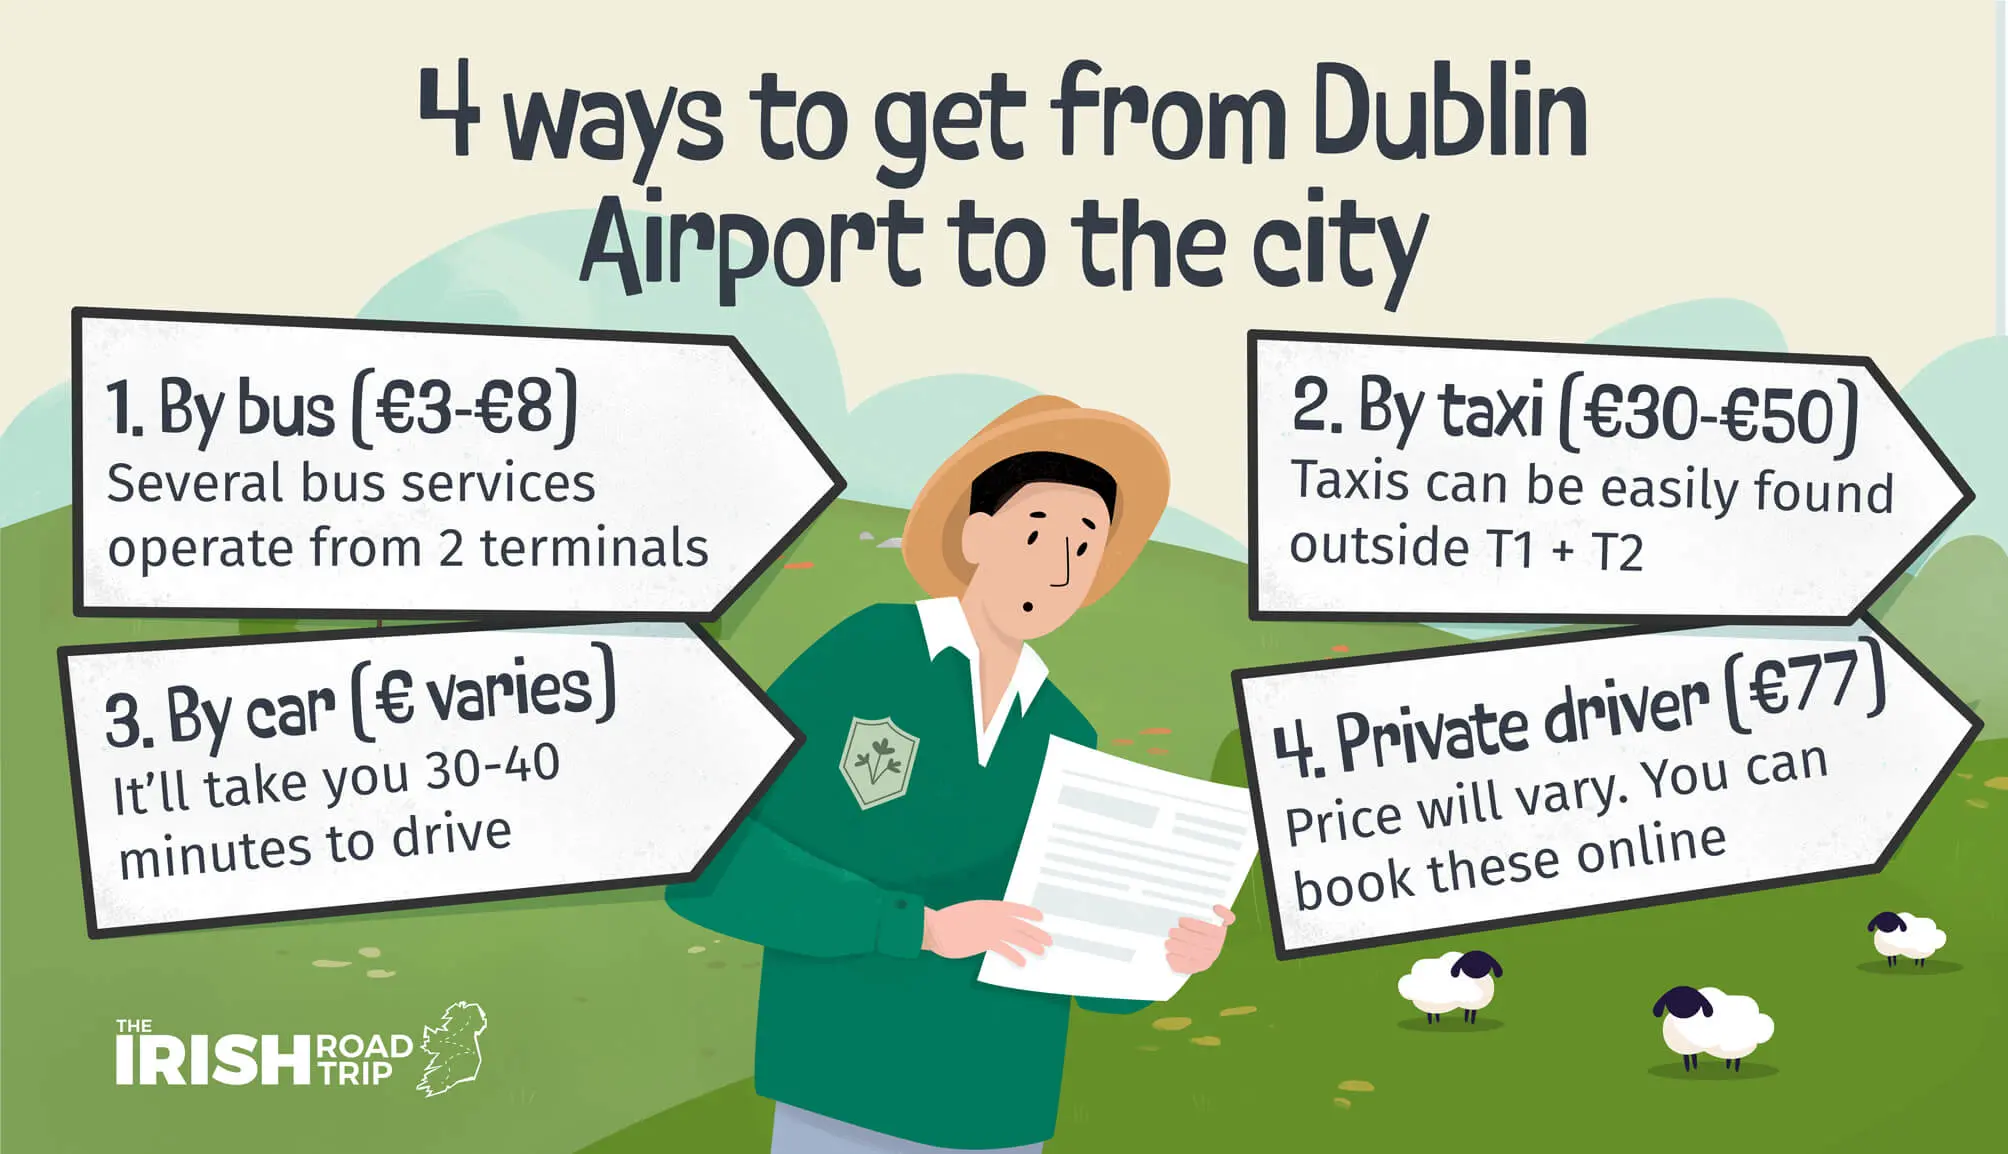 cost of taxi from dublin airport to city centre - How to get to Dublin city Centre from Airport